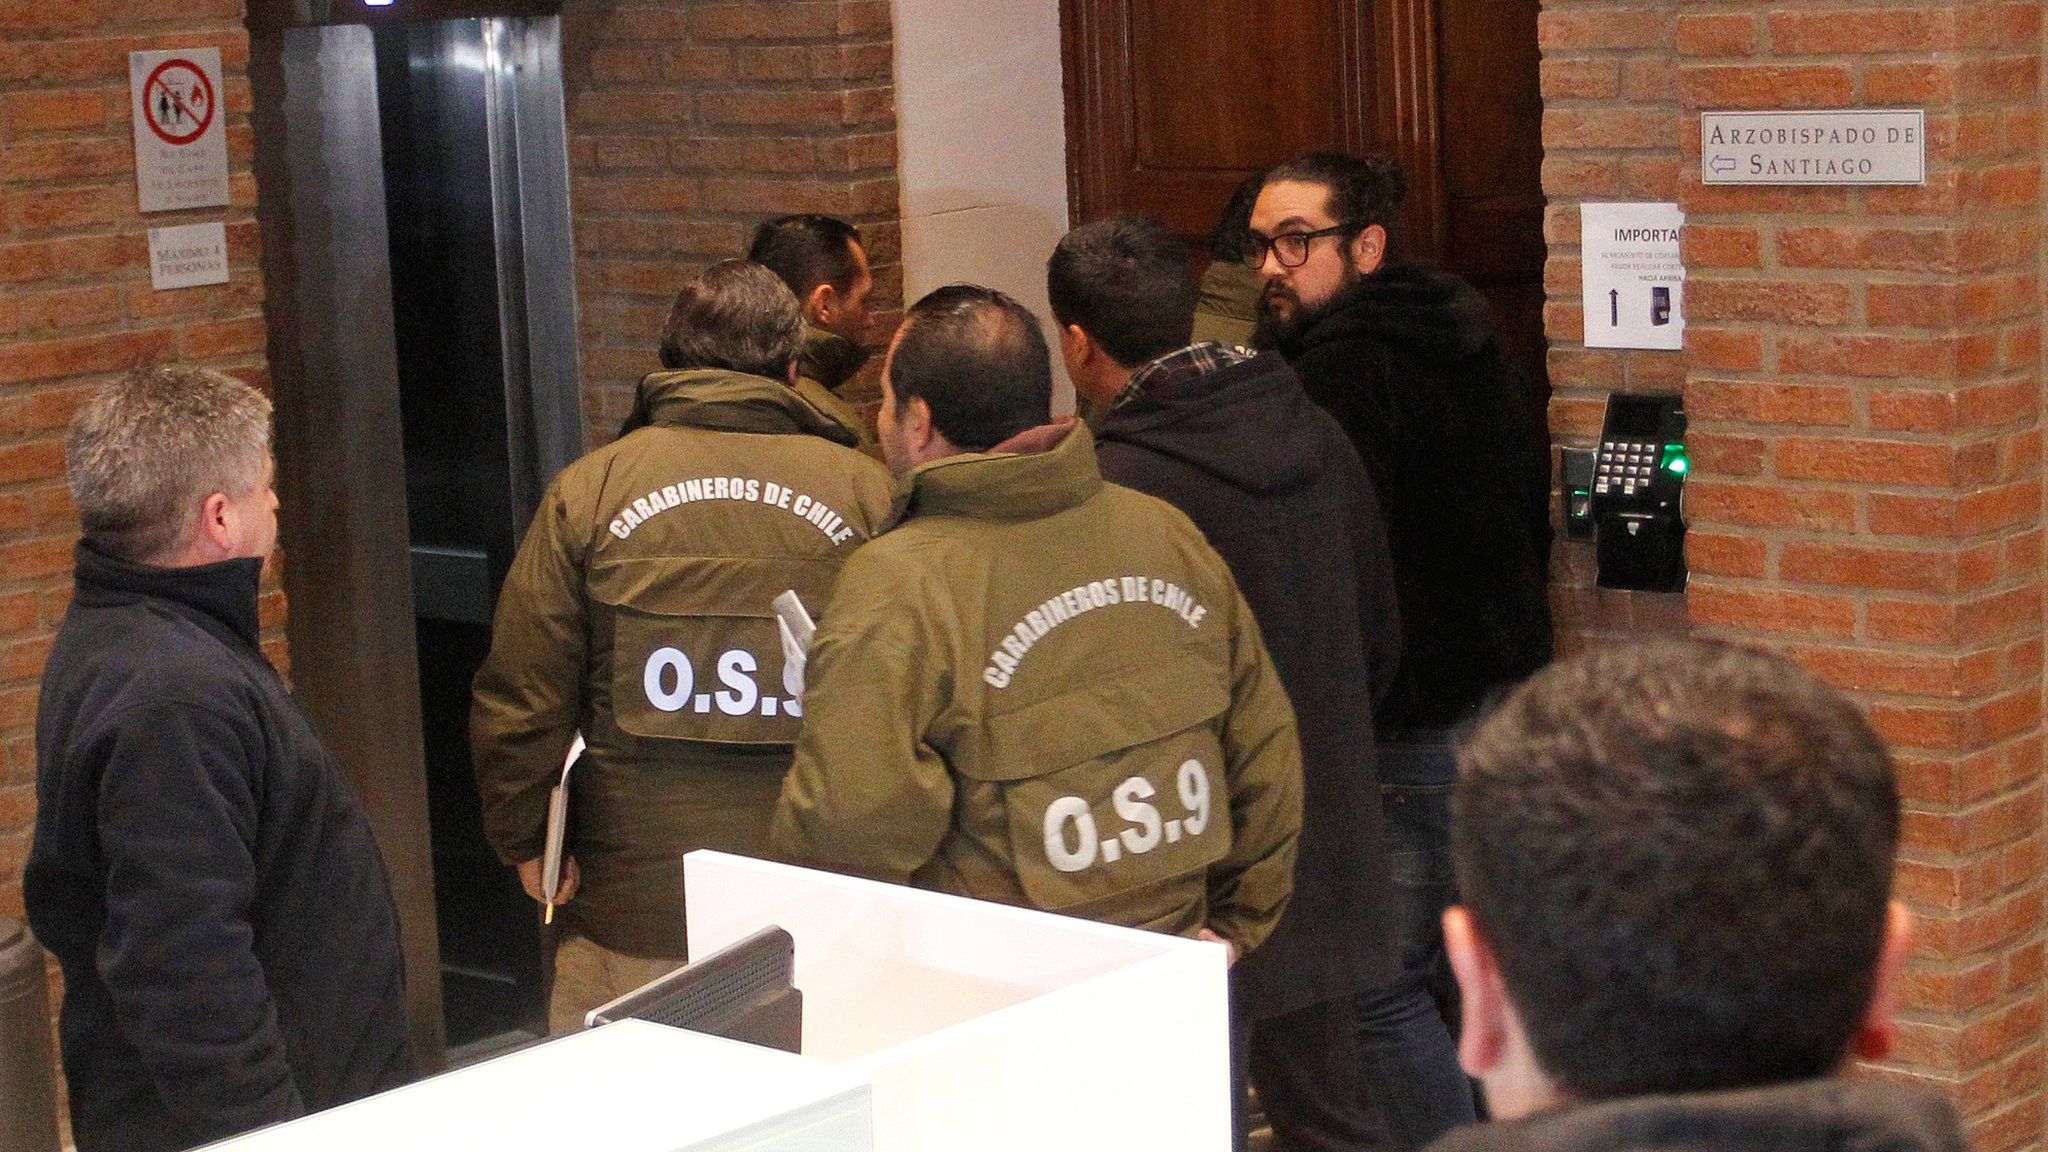 Chilean police officers are seen during the confiscation of the documents inside the office of the Ecclesiastical Court of the archdiocese of Santiago, Chile, June 13, 2018.